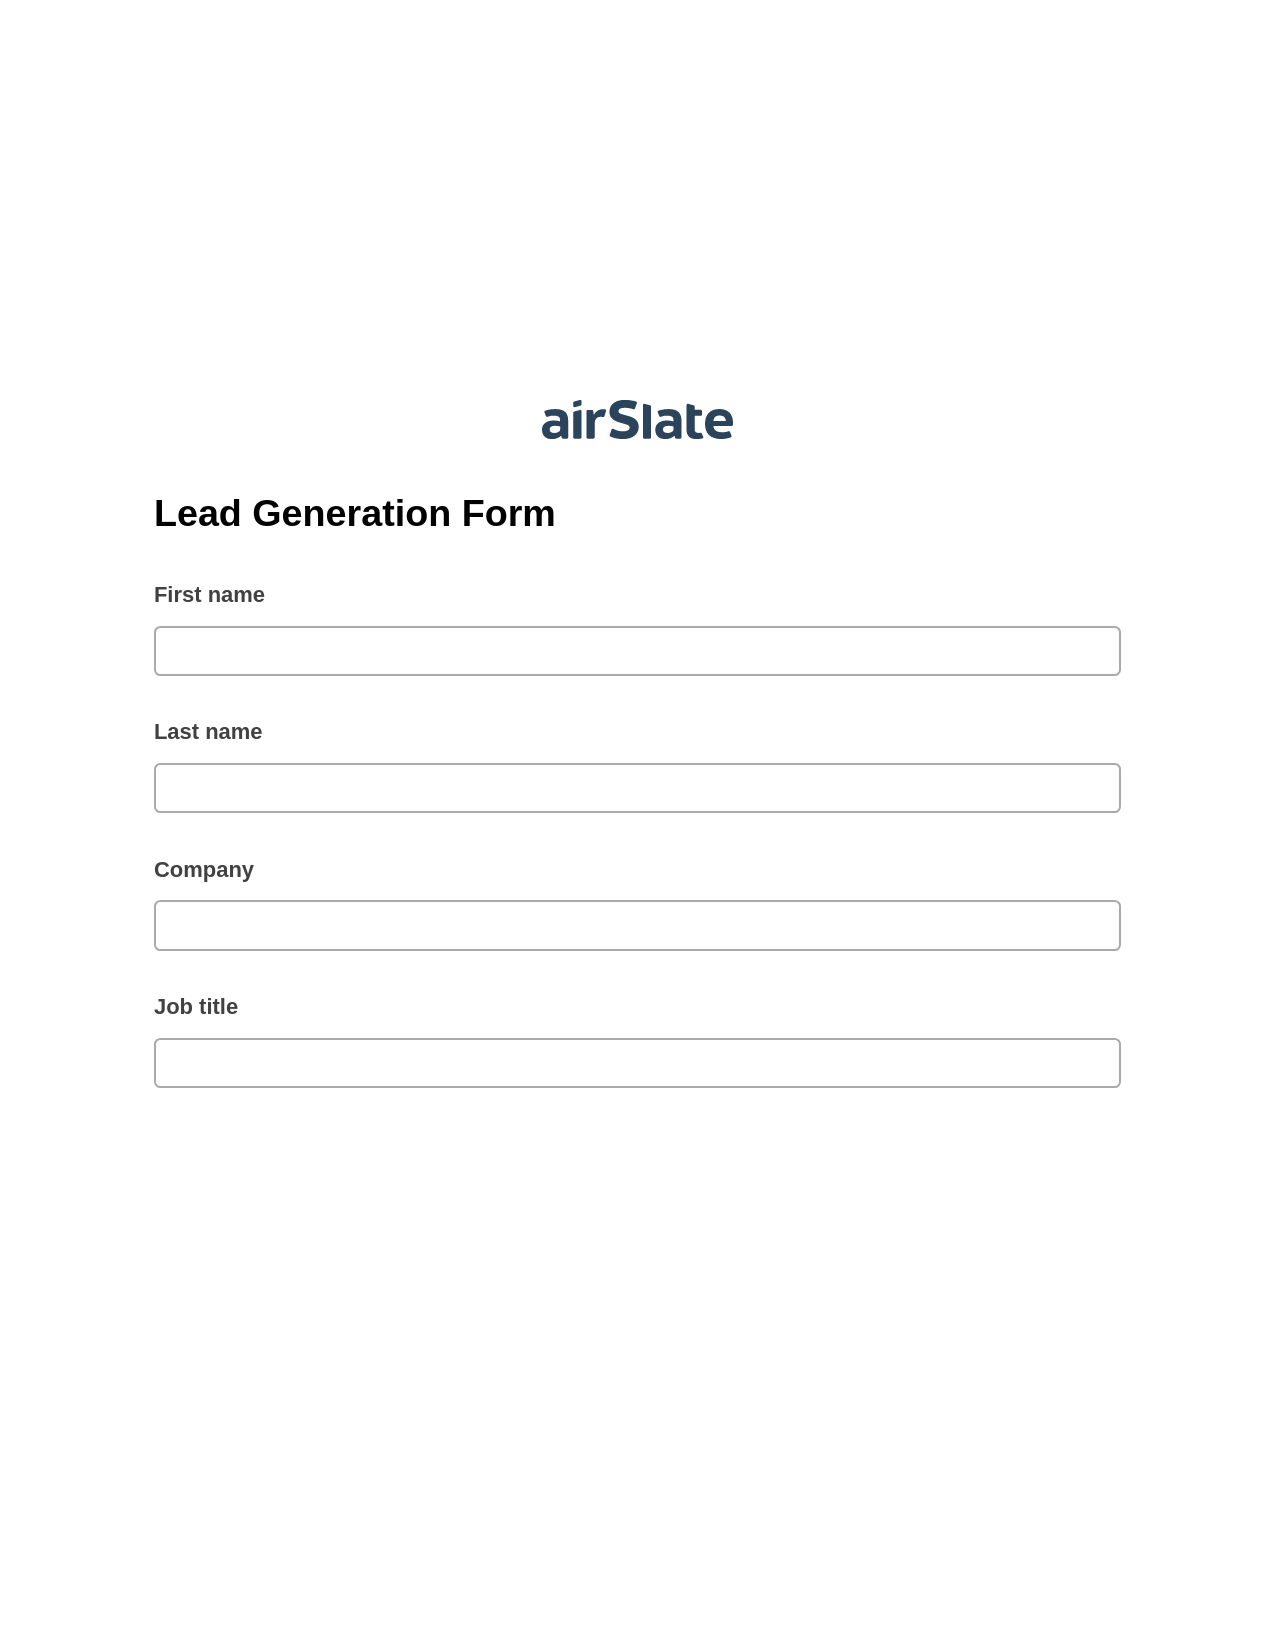 Lead Generation Form Pre-fill from Salesforce Records Bot, Revoke Access Bot, Export to Excel 365 Bot